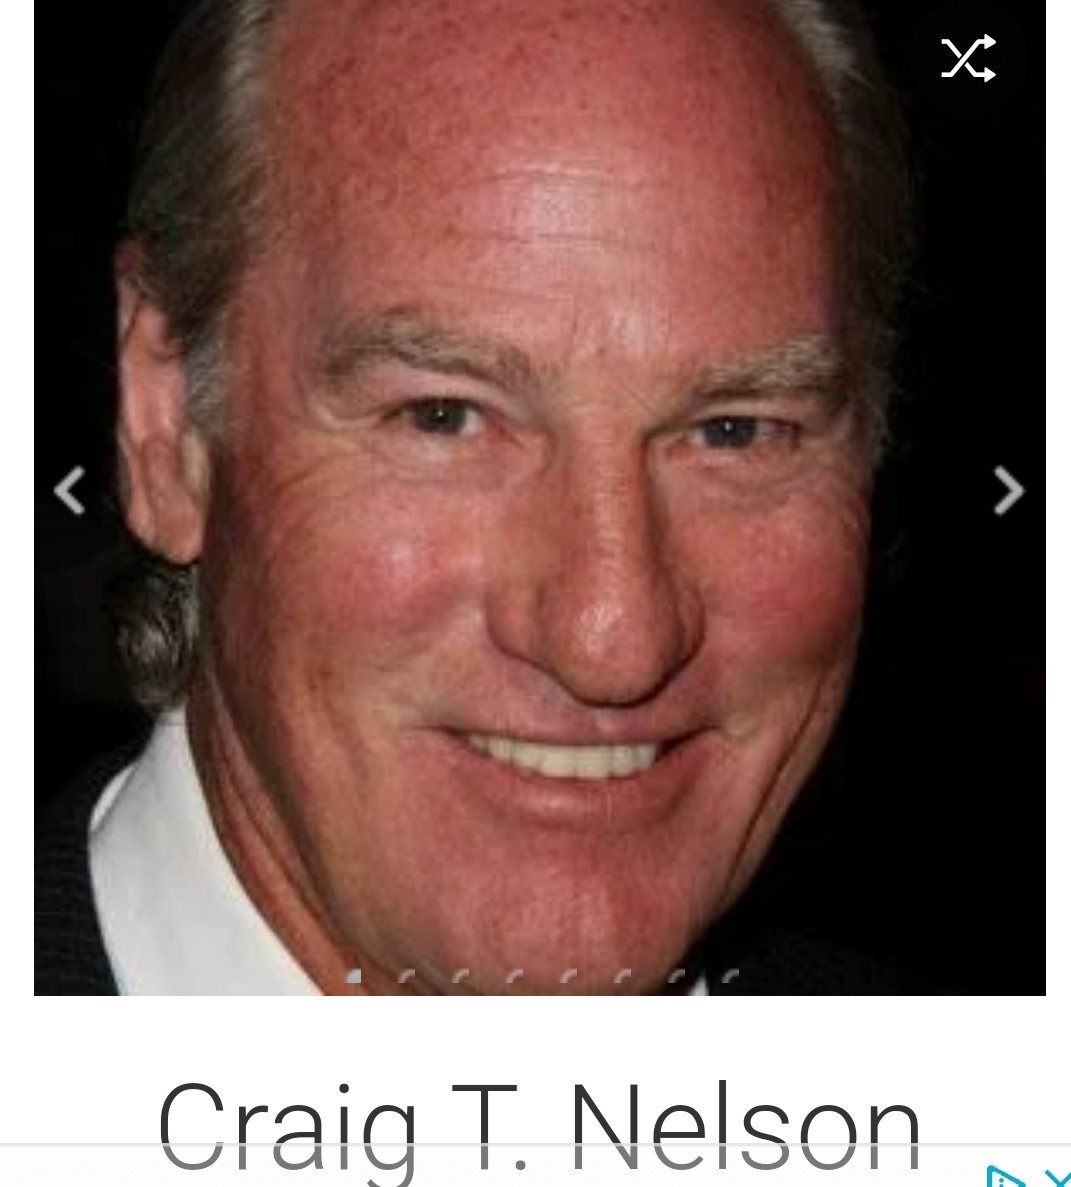 Happy Birthday to the Coach from the show named Coach.  Happy Birthday to Craig T. Nelson 